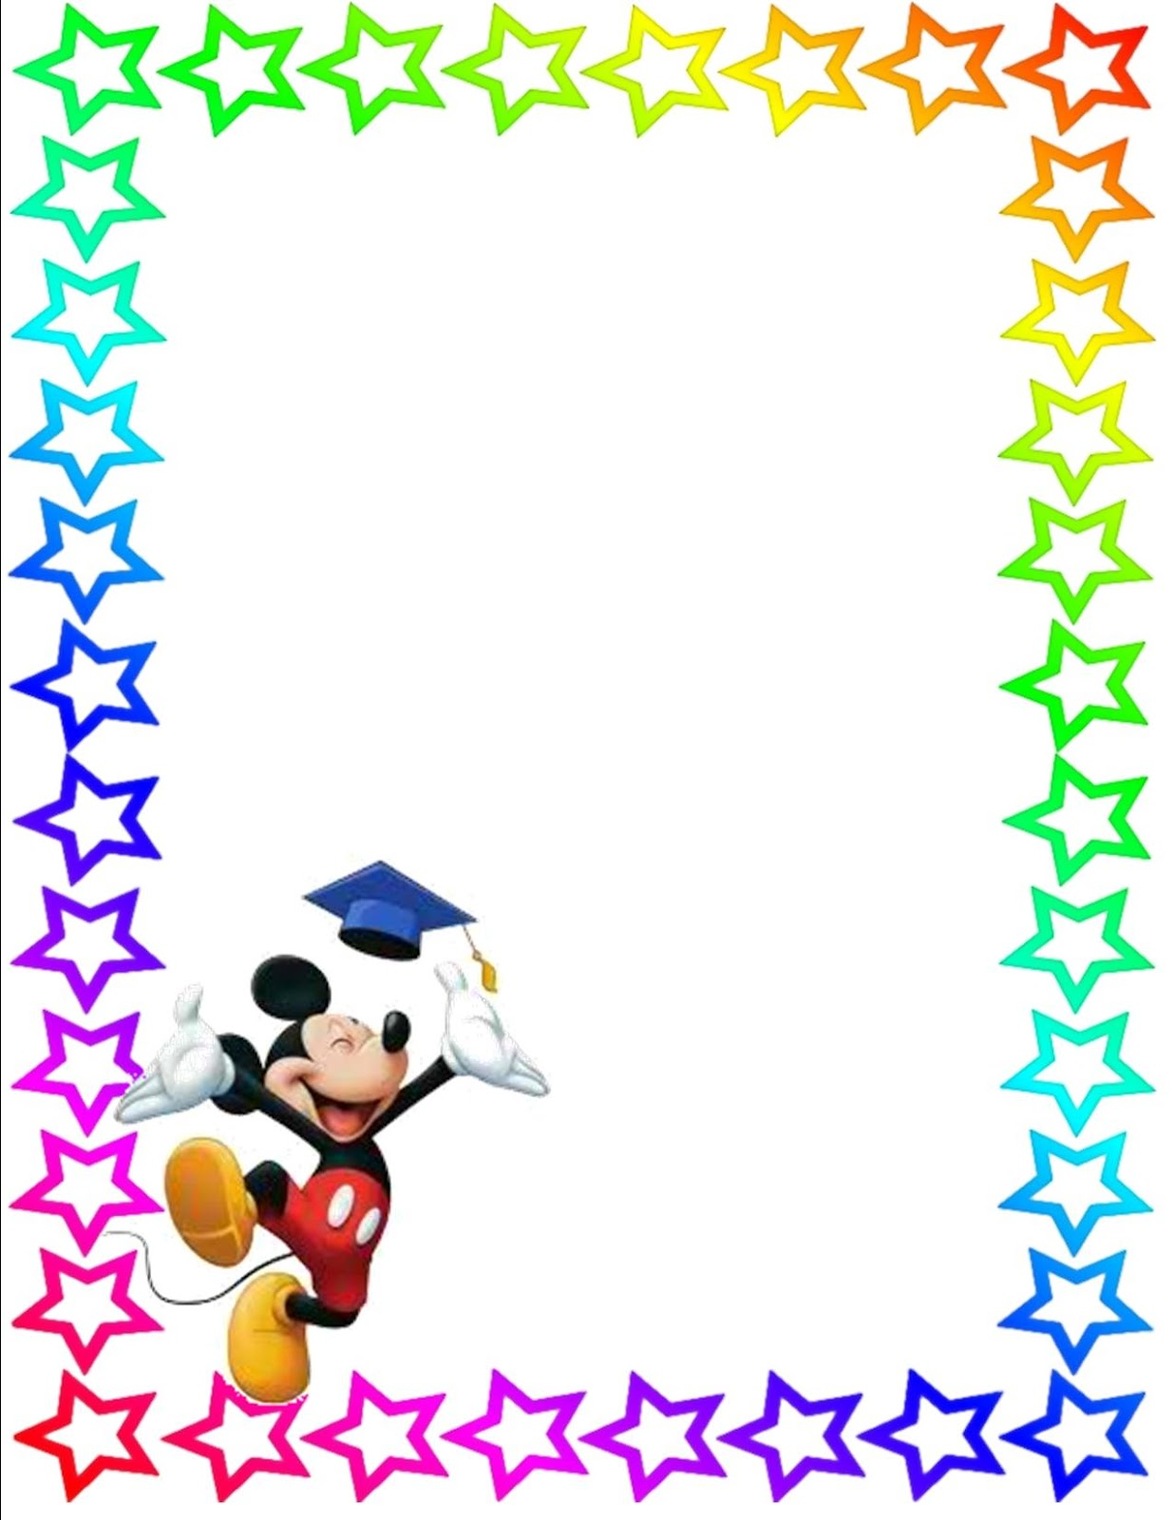 Graduation Border Clipart - Free to use Clip Art Resource